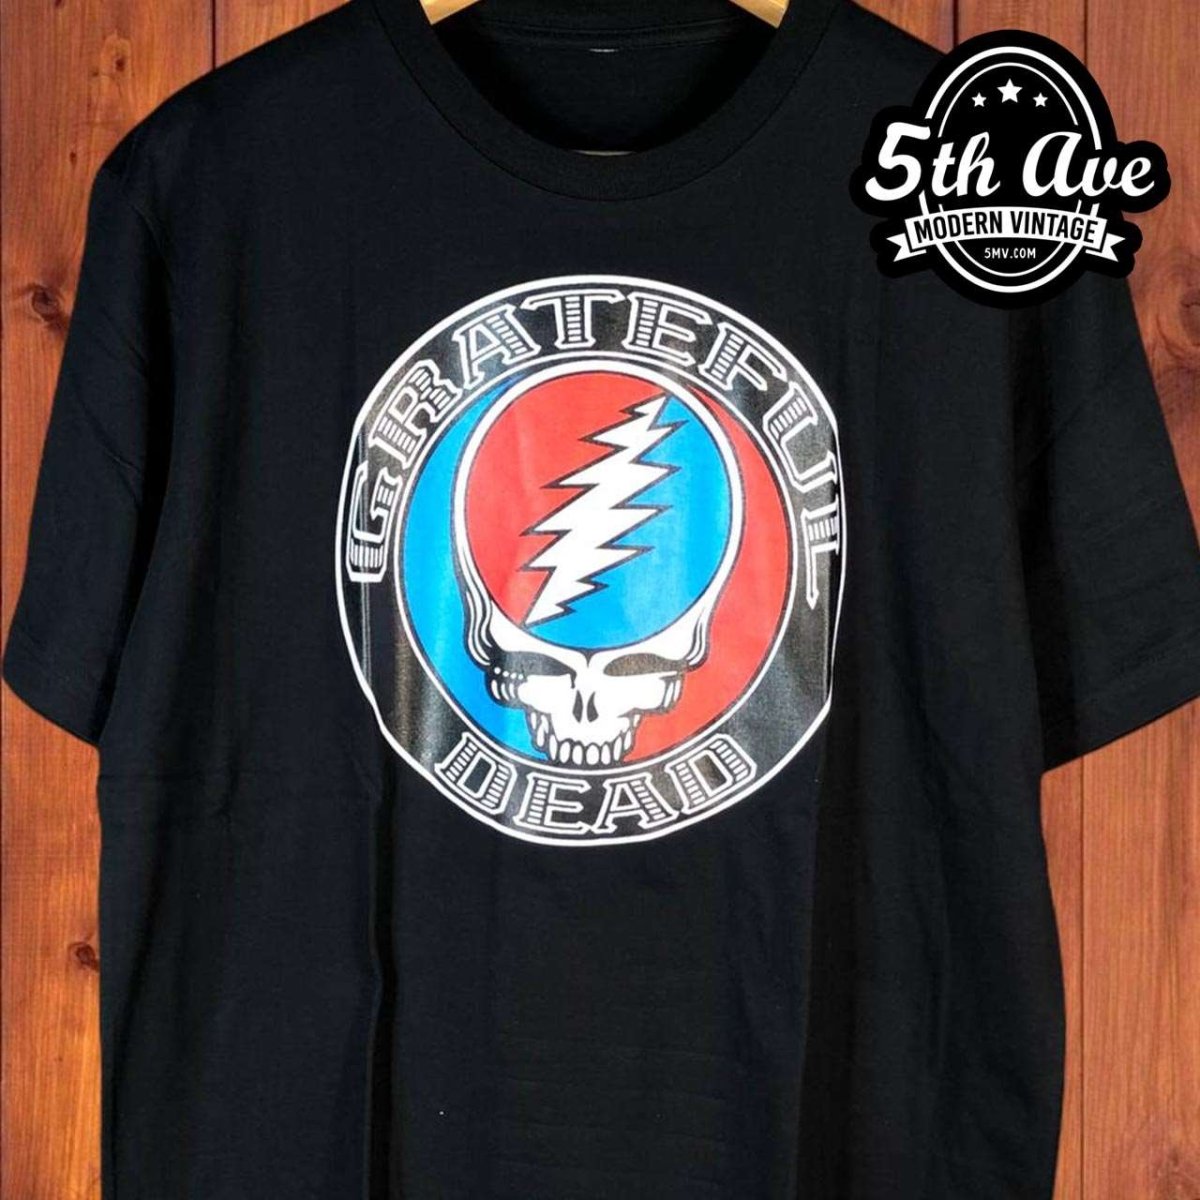 Classic Black Grateful Dead T-Shirt with Blue, Red, and White Stealie Logo - Vintage Band Shirts